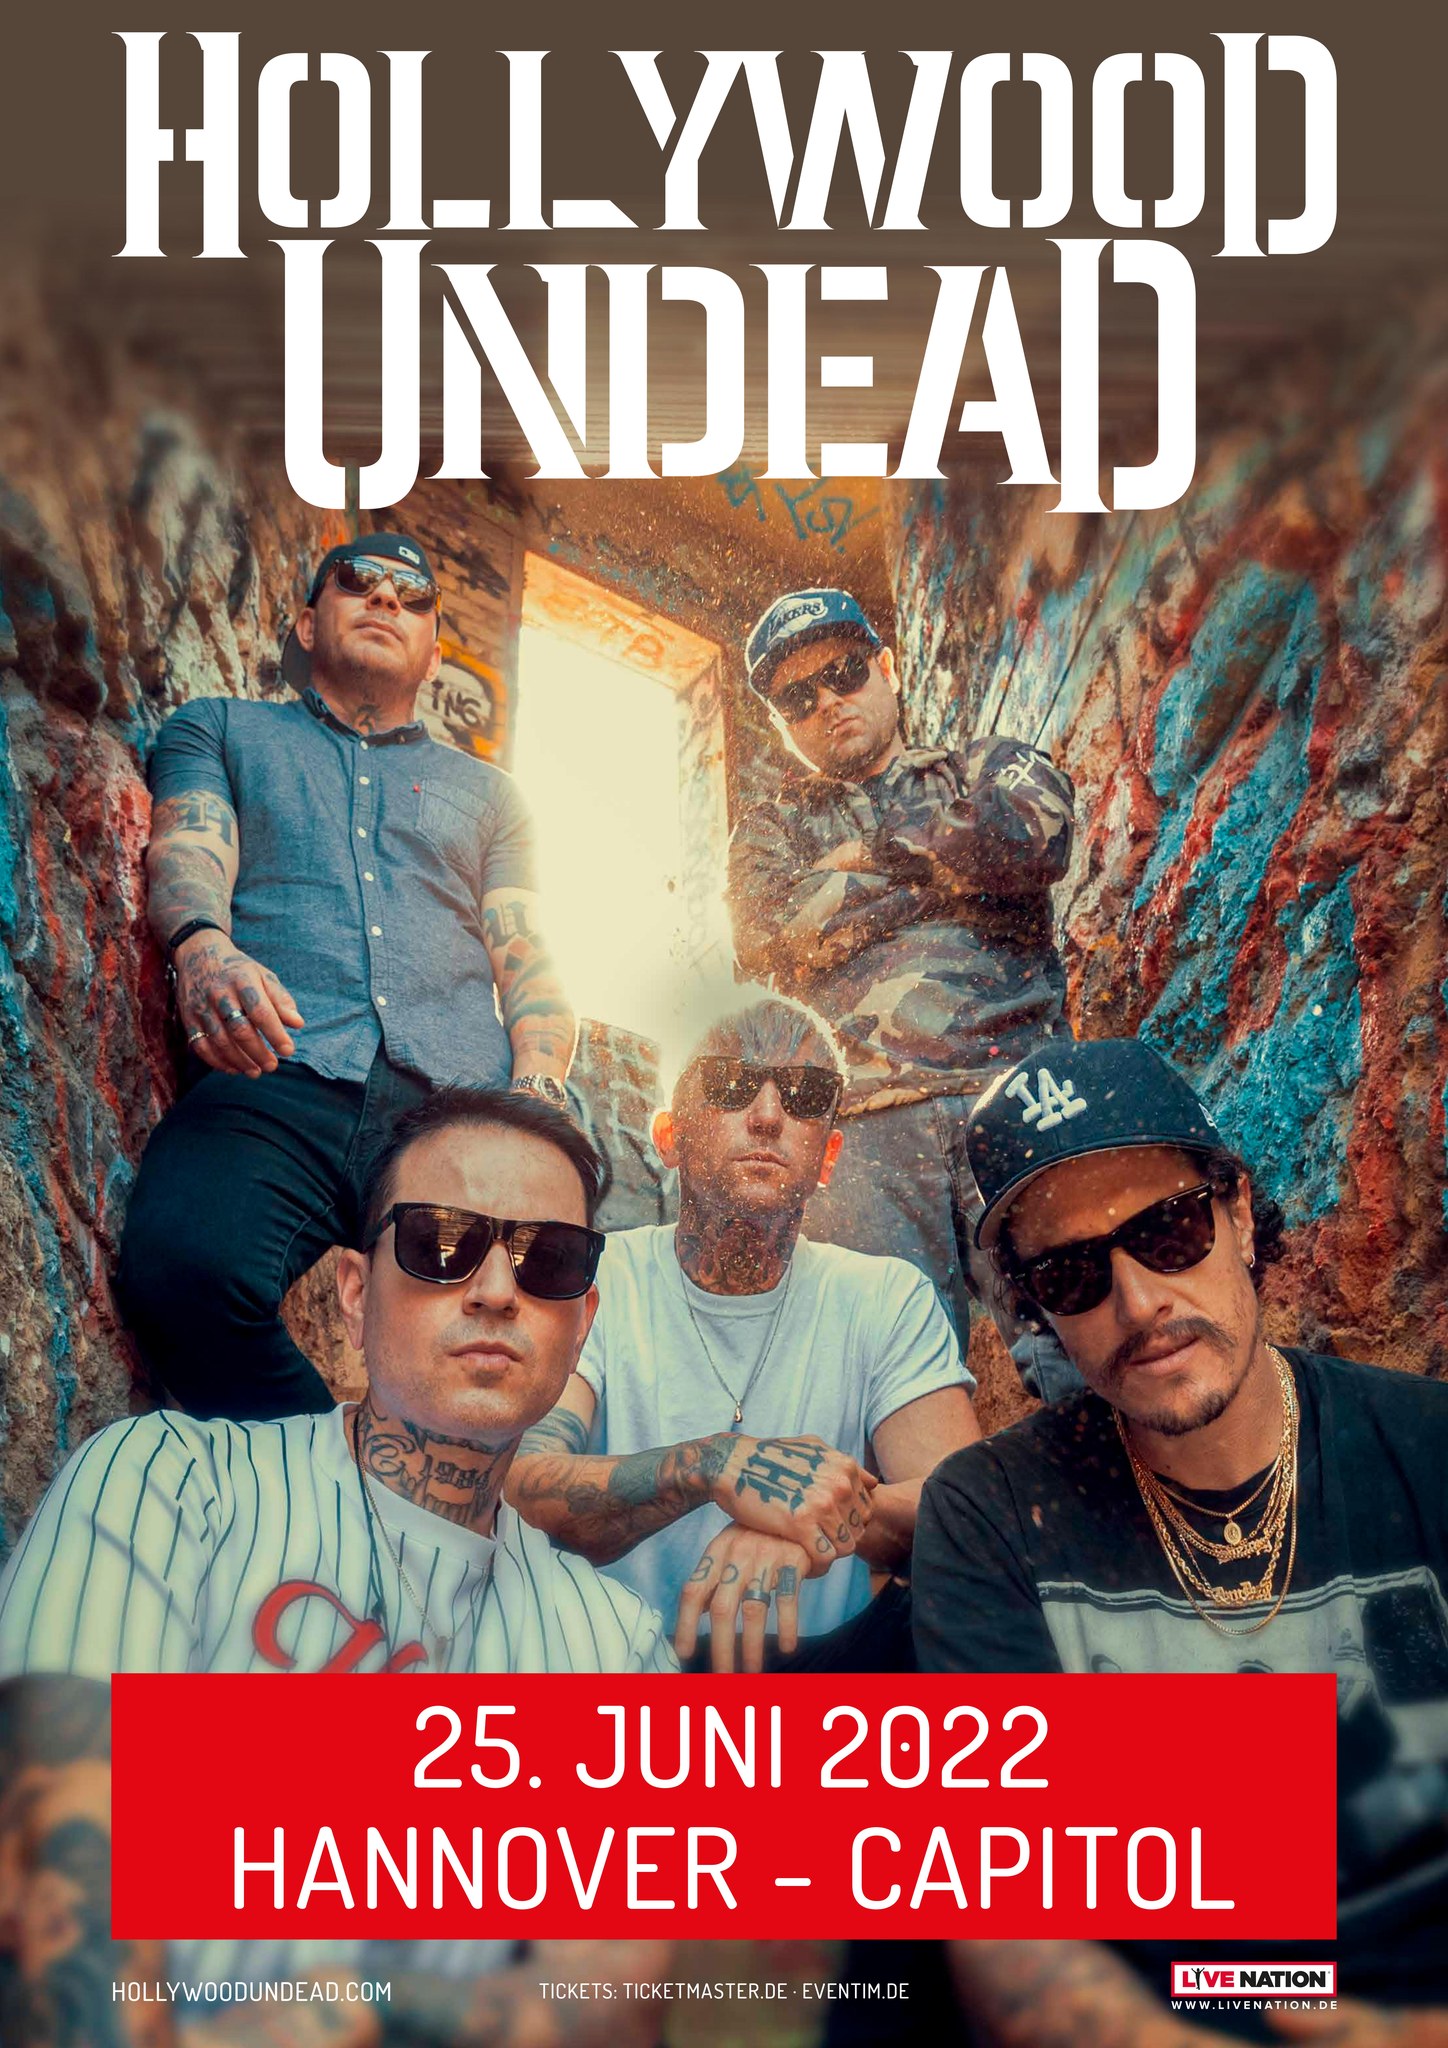 Hollywood Undead Tickets Konzert Tour 2022 Hannover